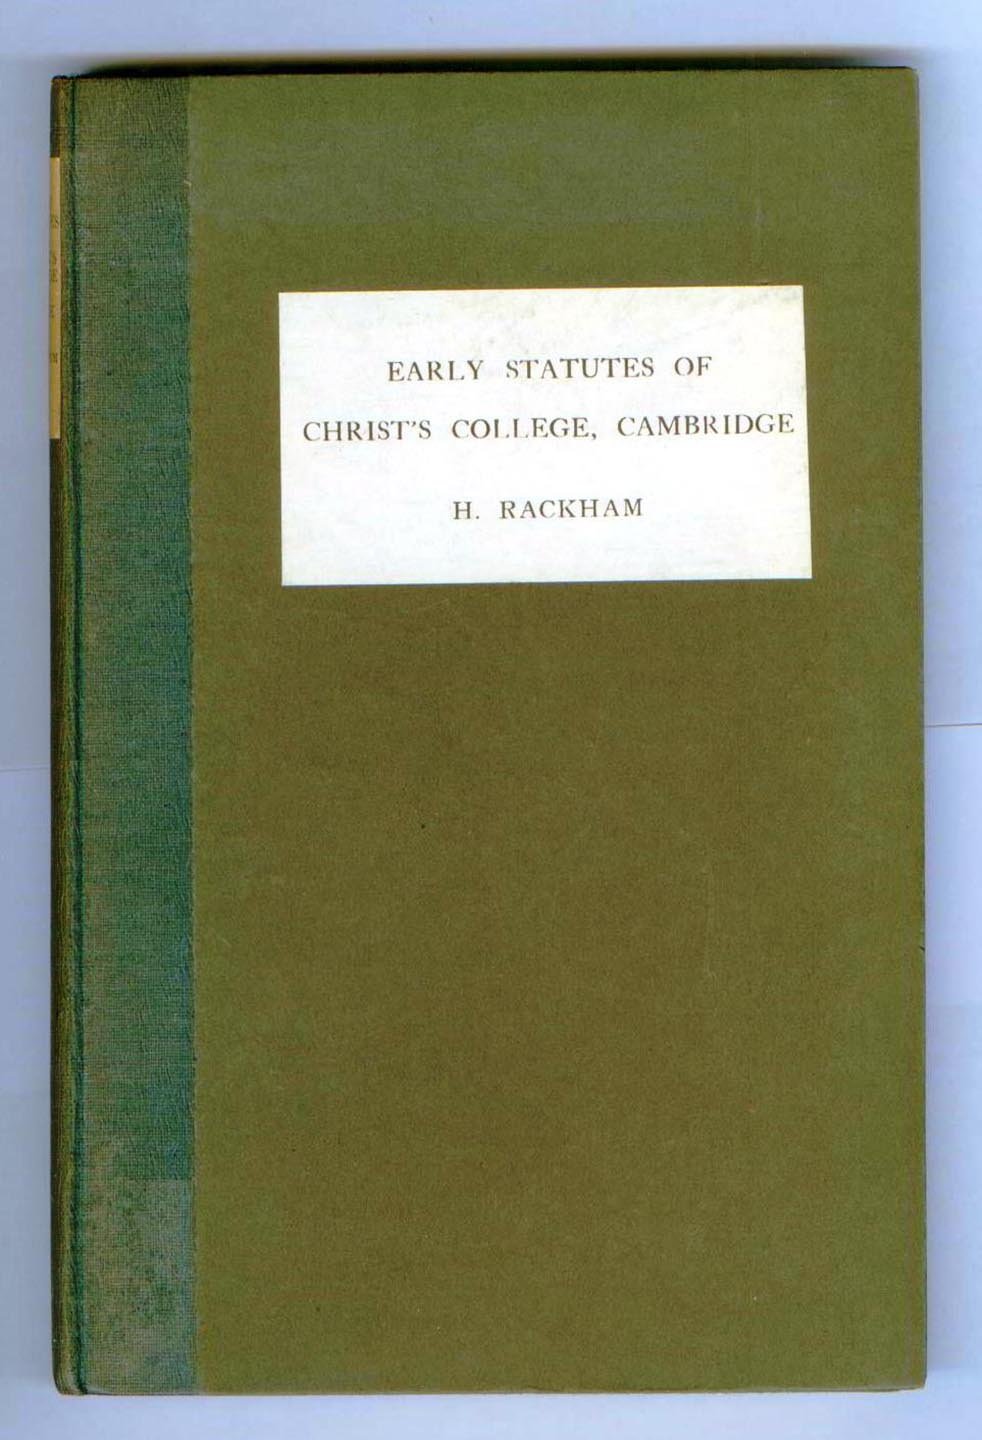 Early Statutes of Christ's College, Cambridge. With the Statutes of the Prior Foundation of God's House